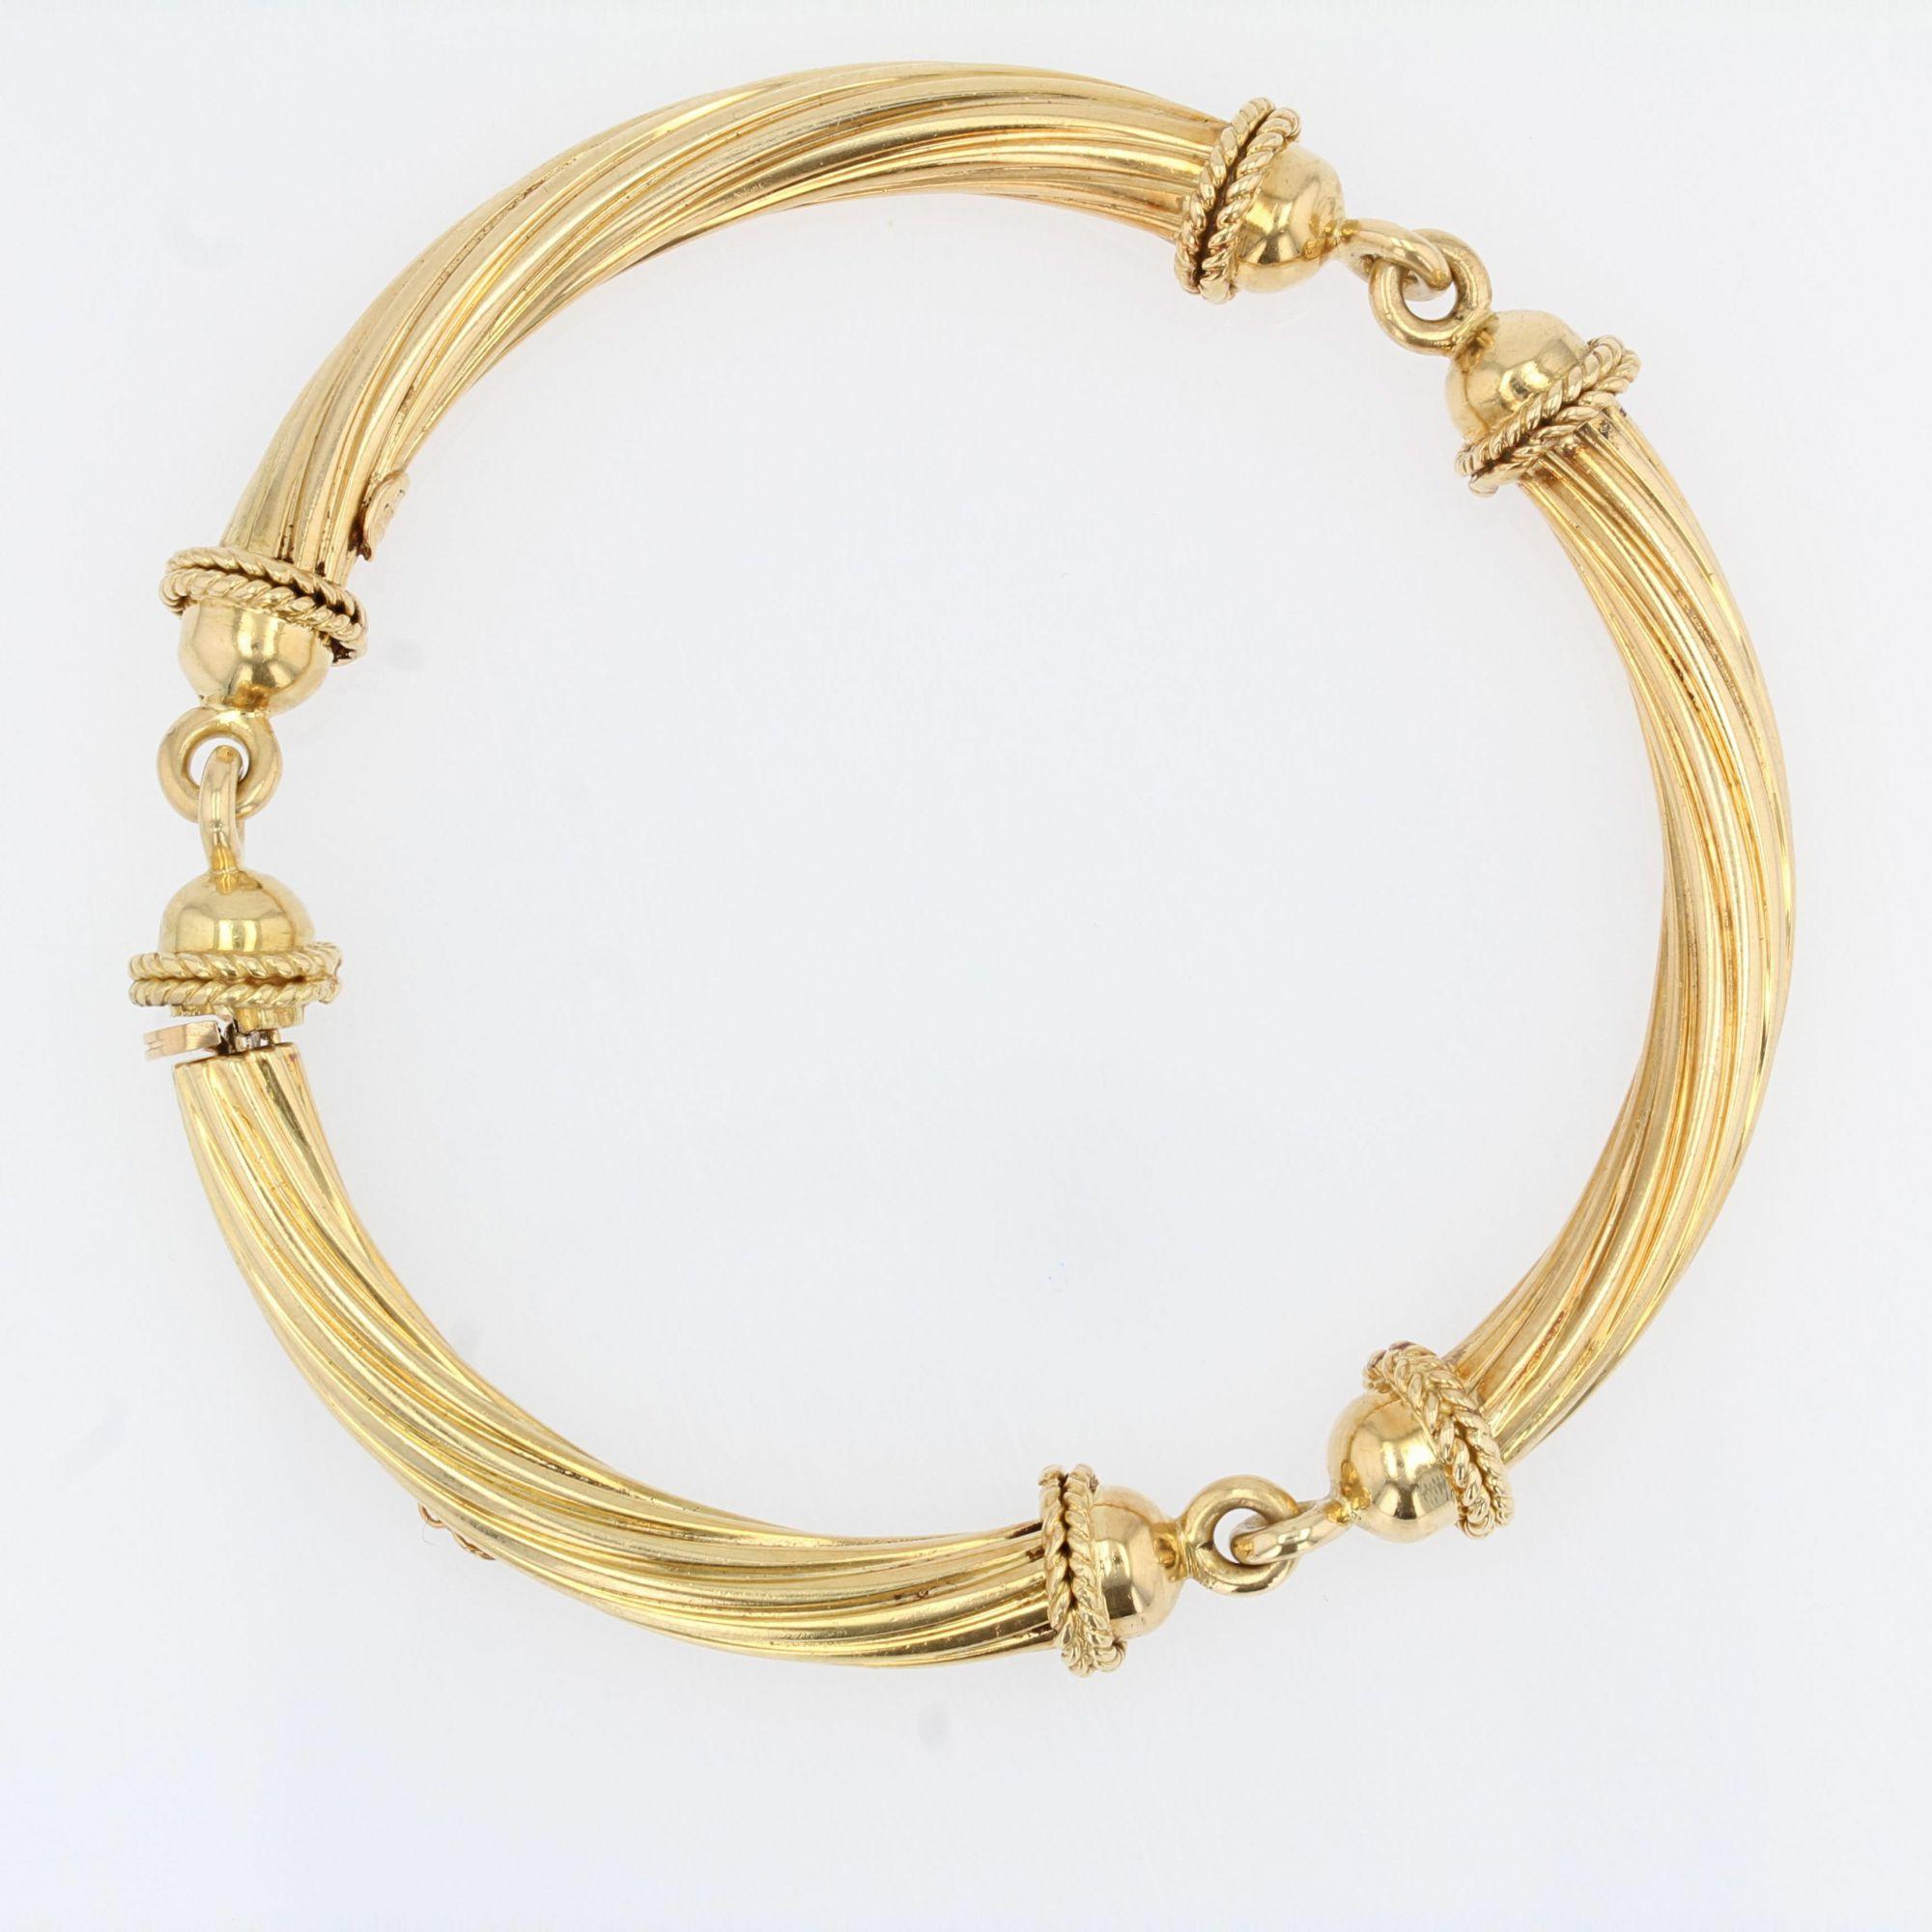 1960s 18 Karat Yellow Gold Articulated Bangle Bracelet For Sale 3